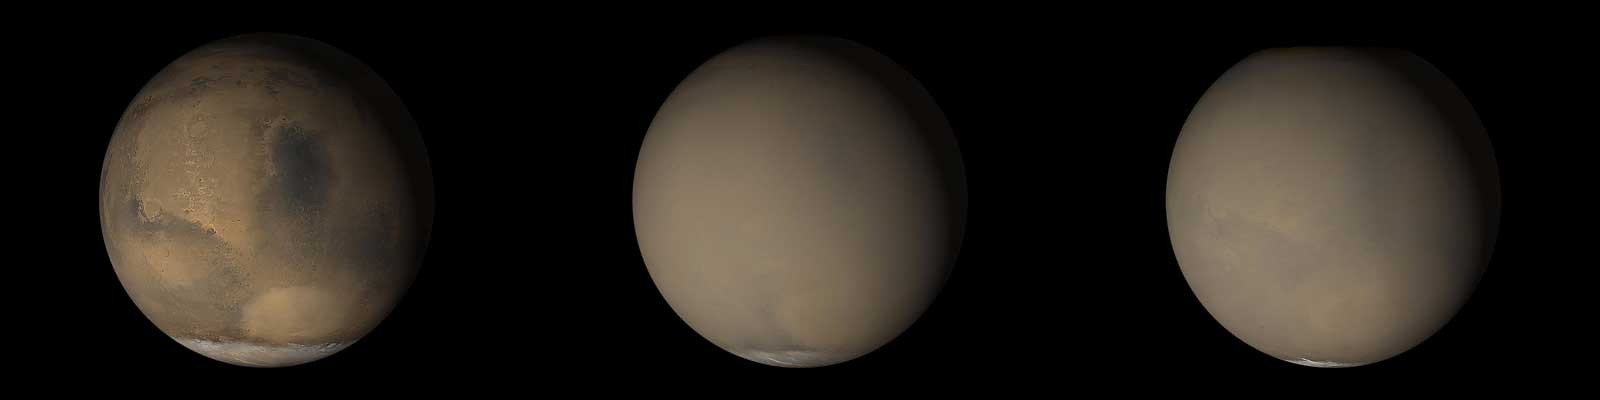 two global mars views, one clear one hazy